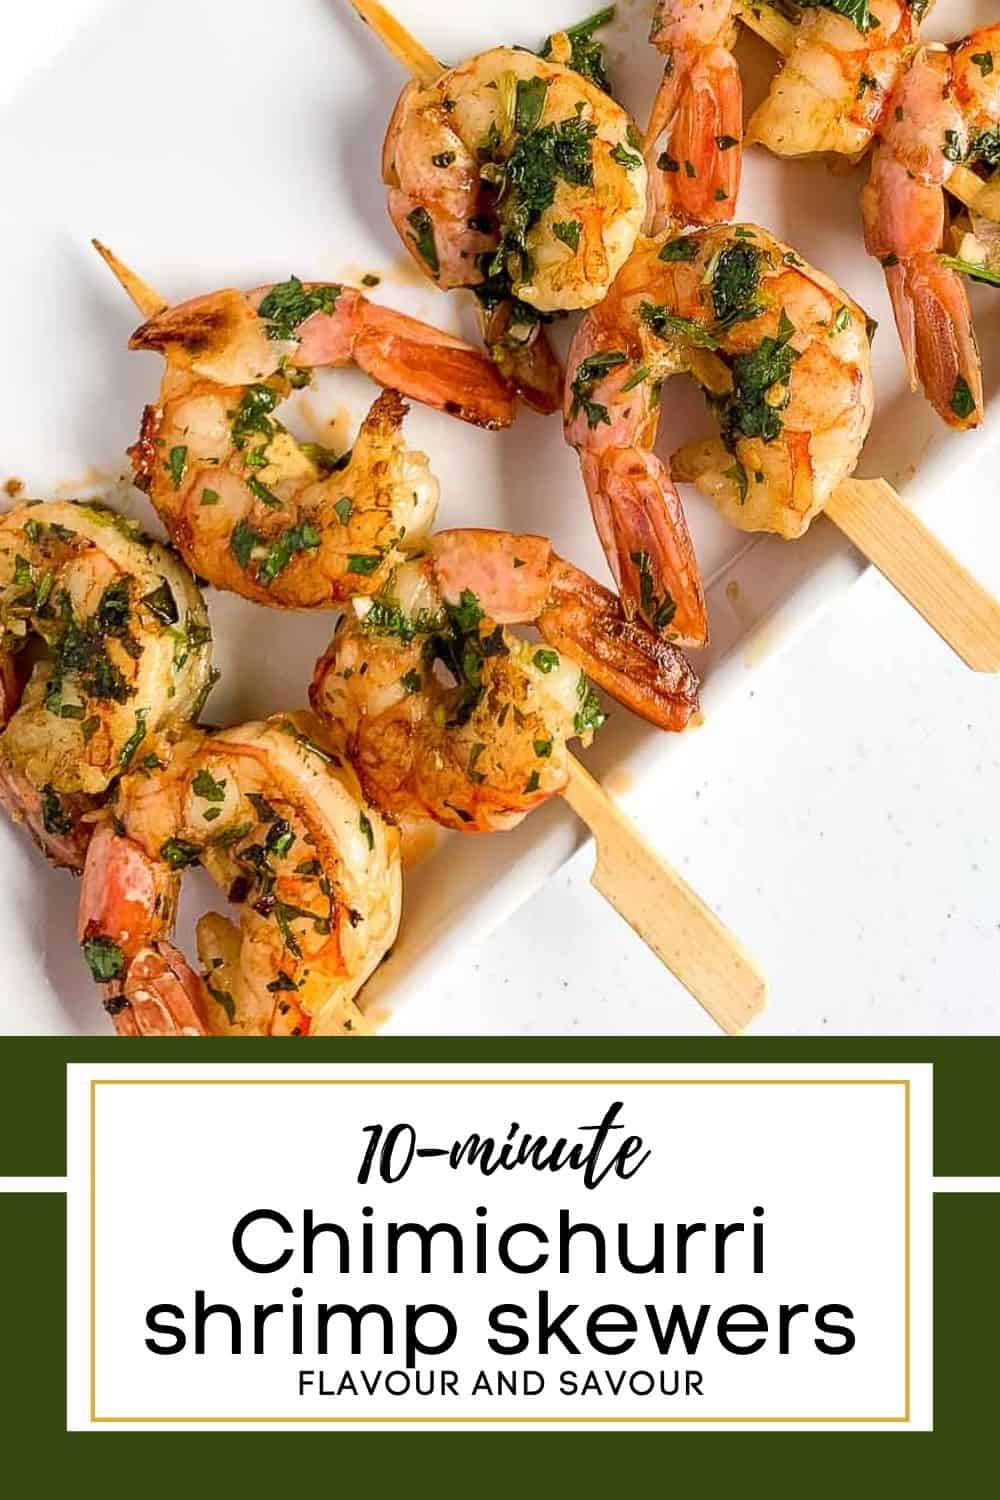 image with text for 10-minute Chimichurri Shrimp Skewers